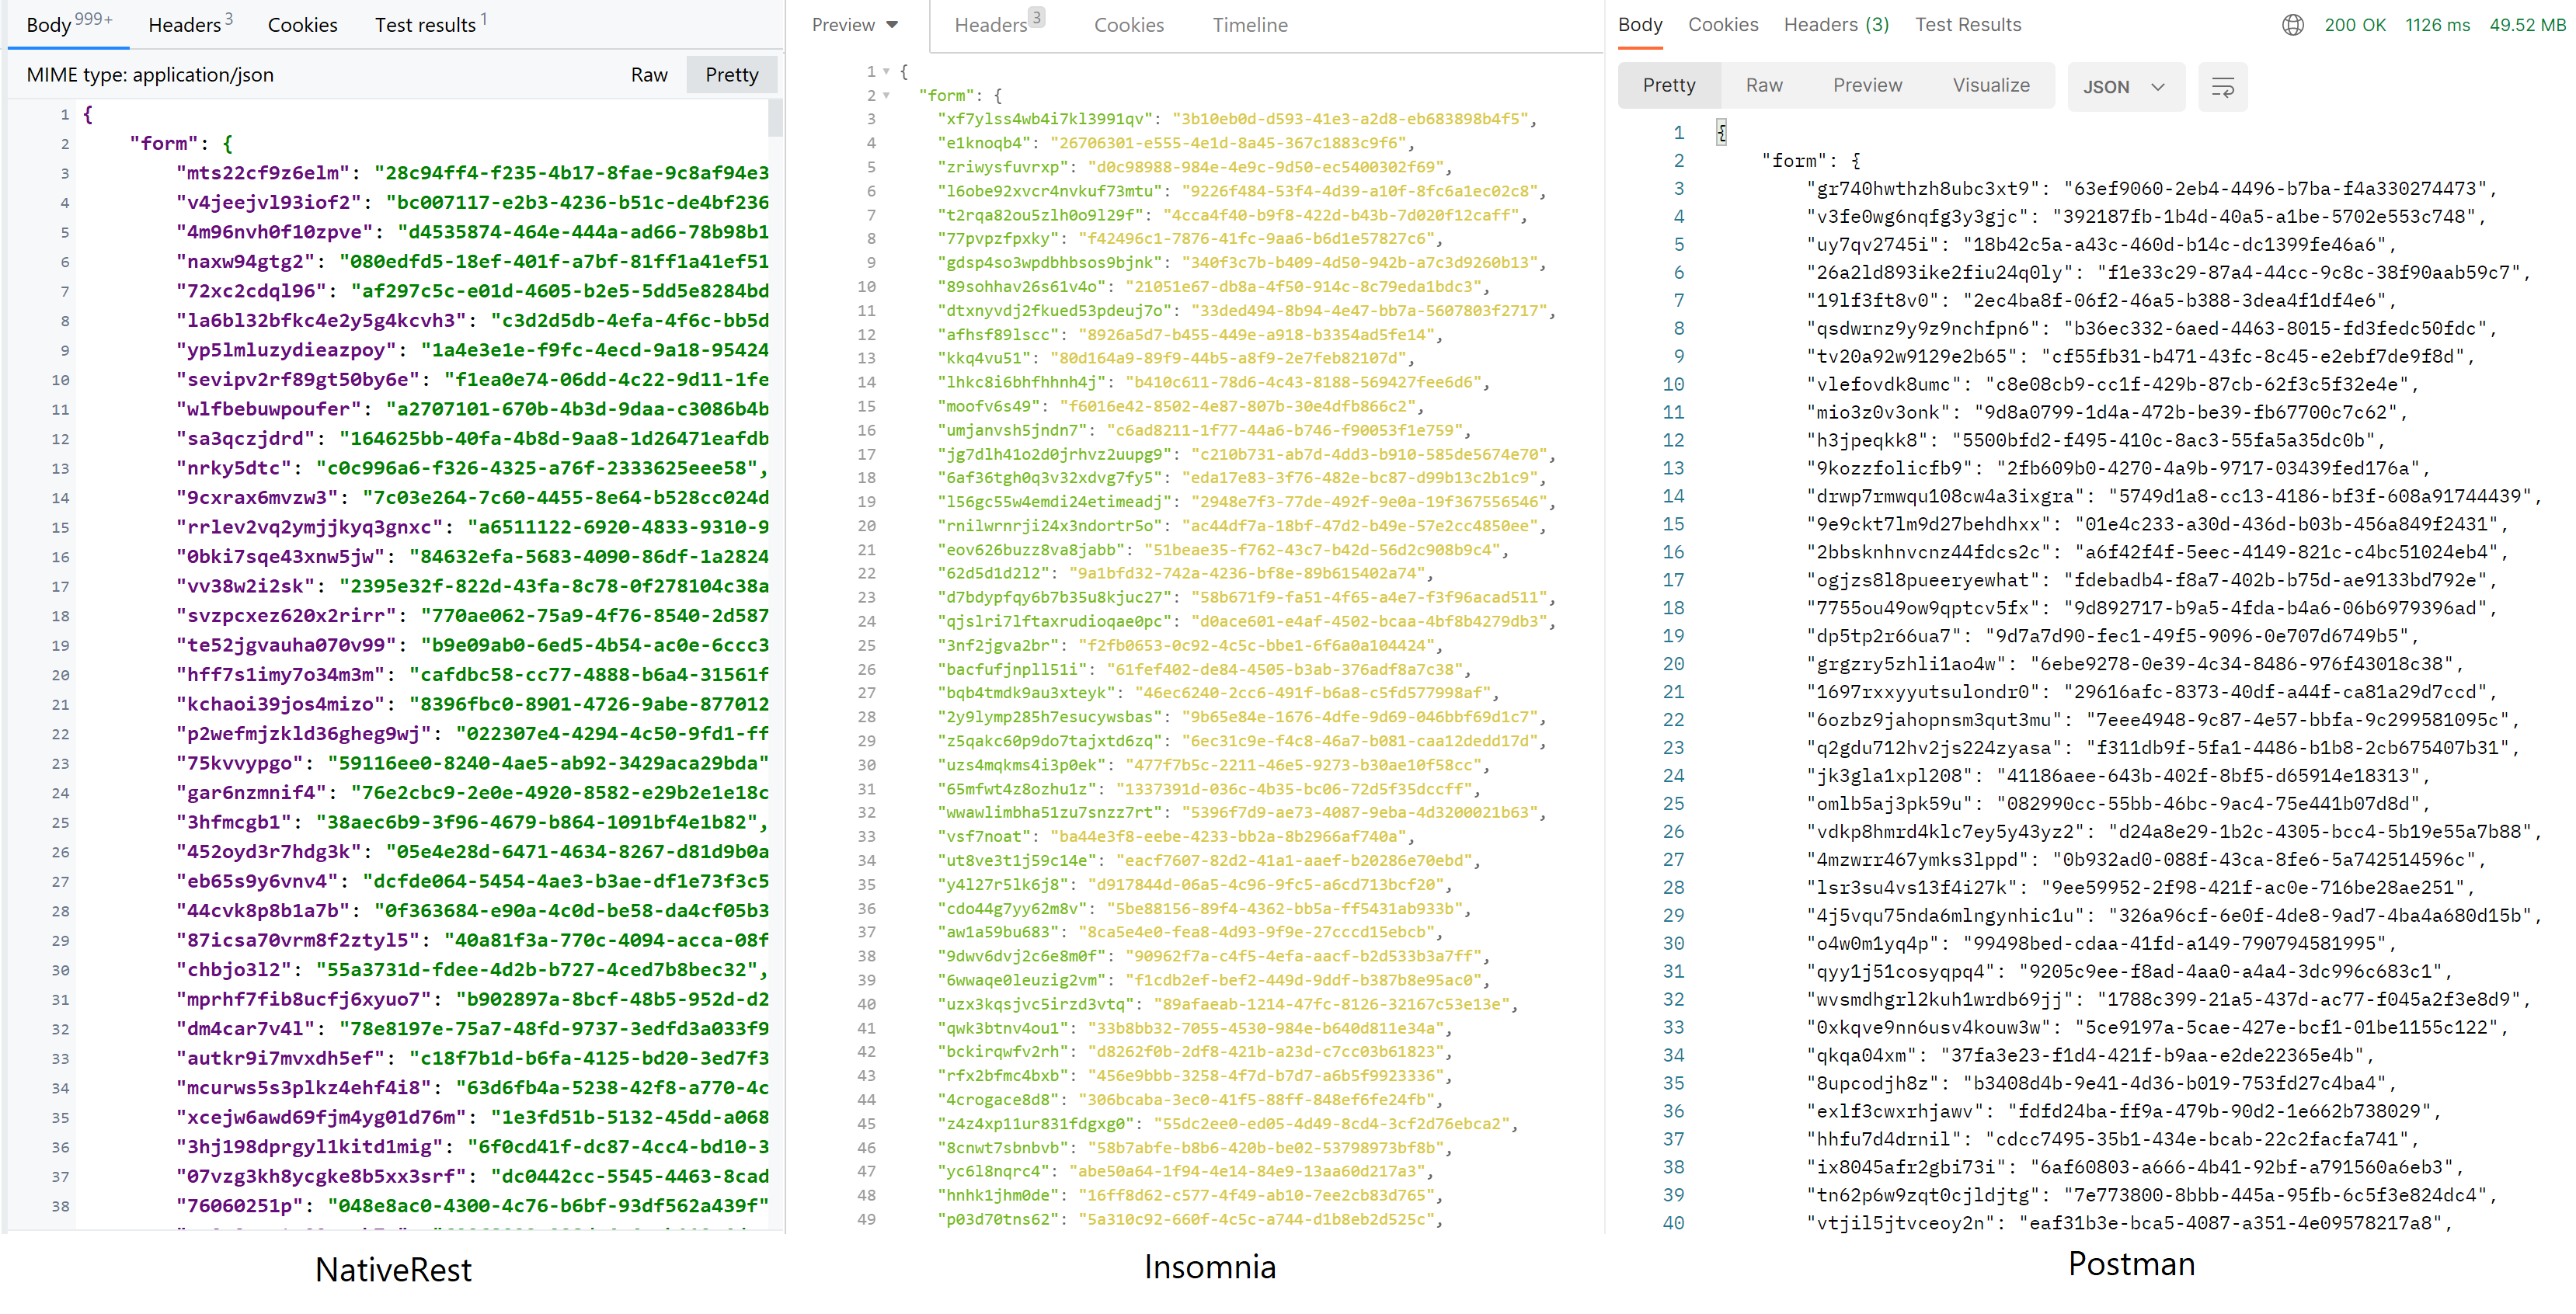 Comparison of NativeRest, Insomnia and Postman (preview of JSON)